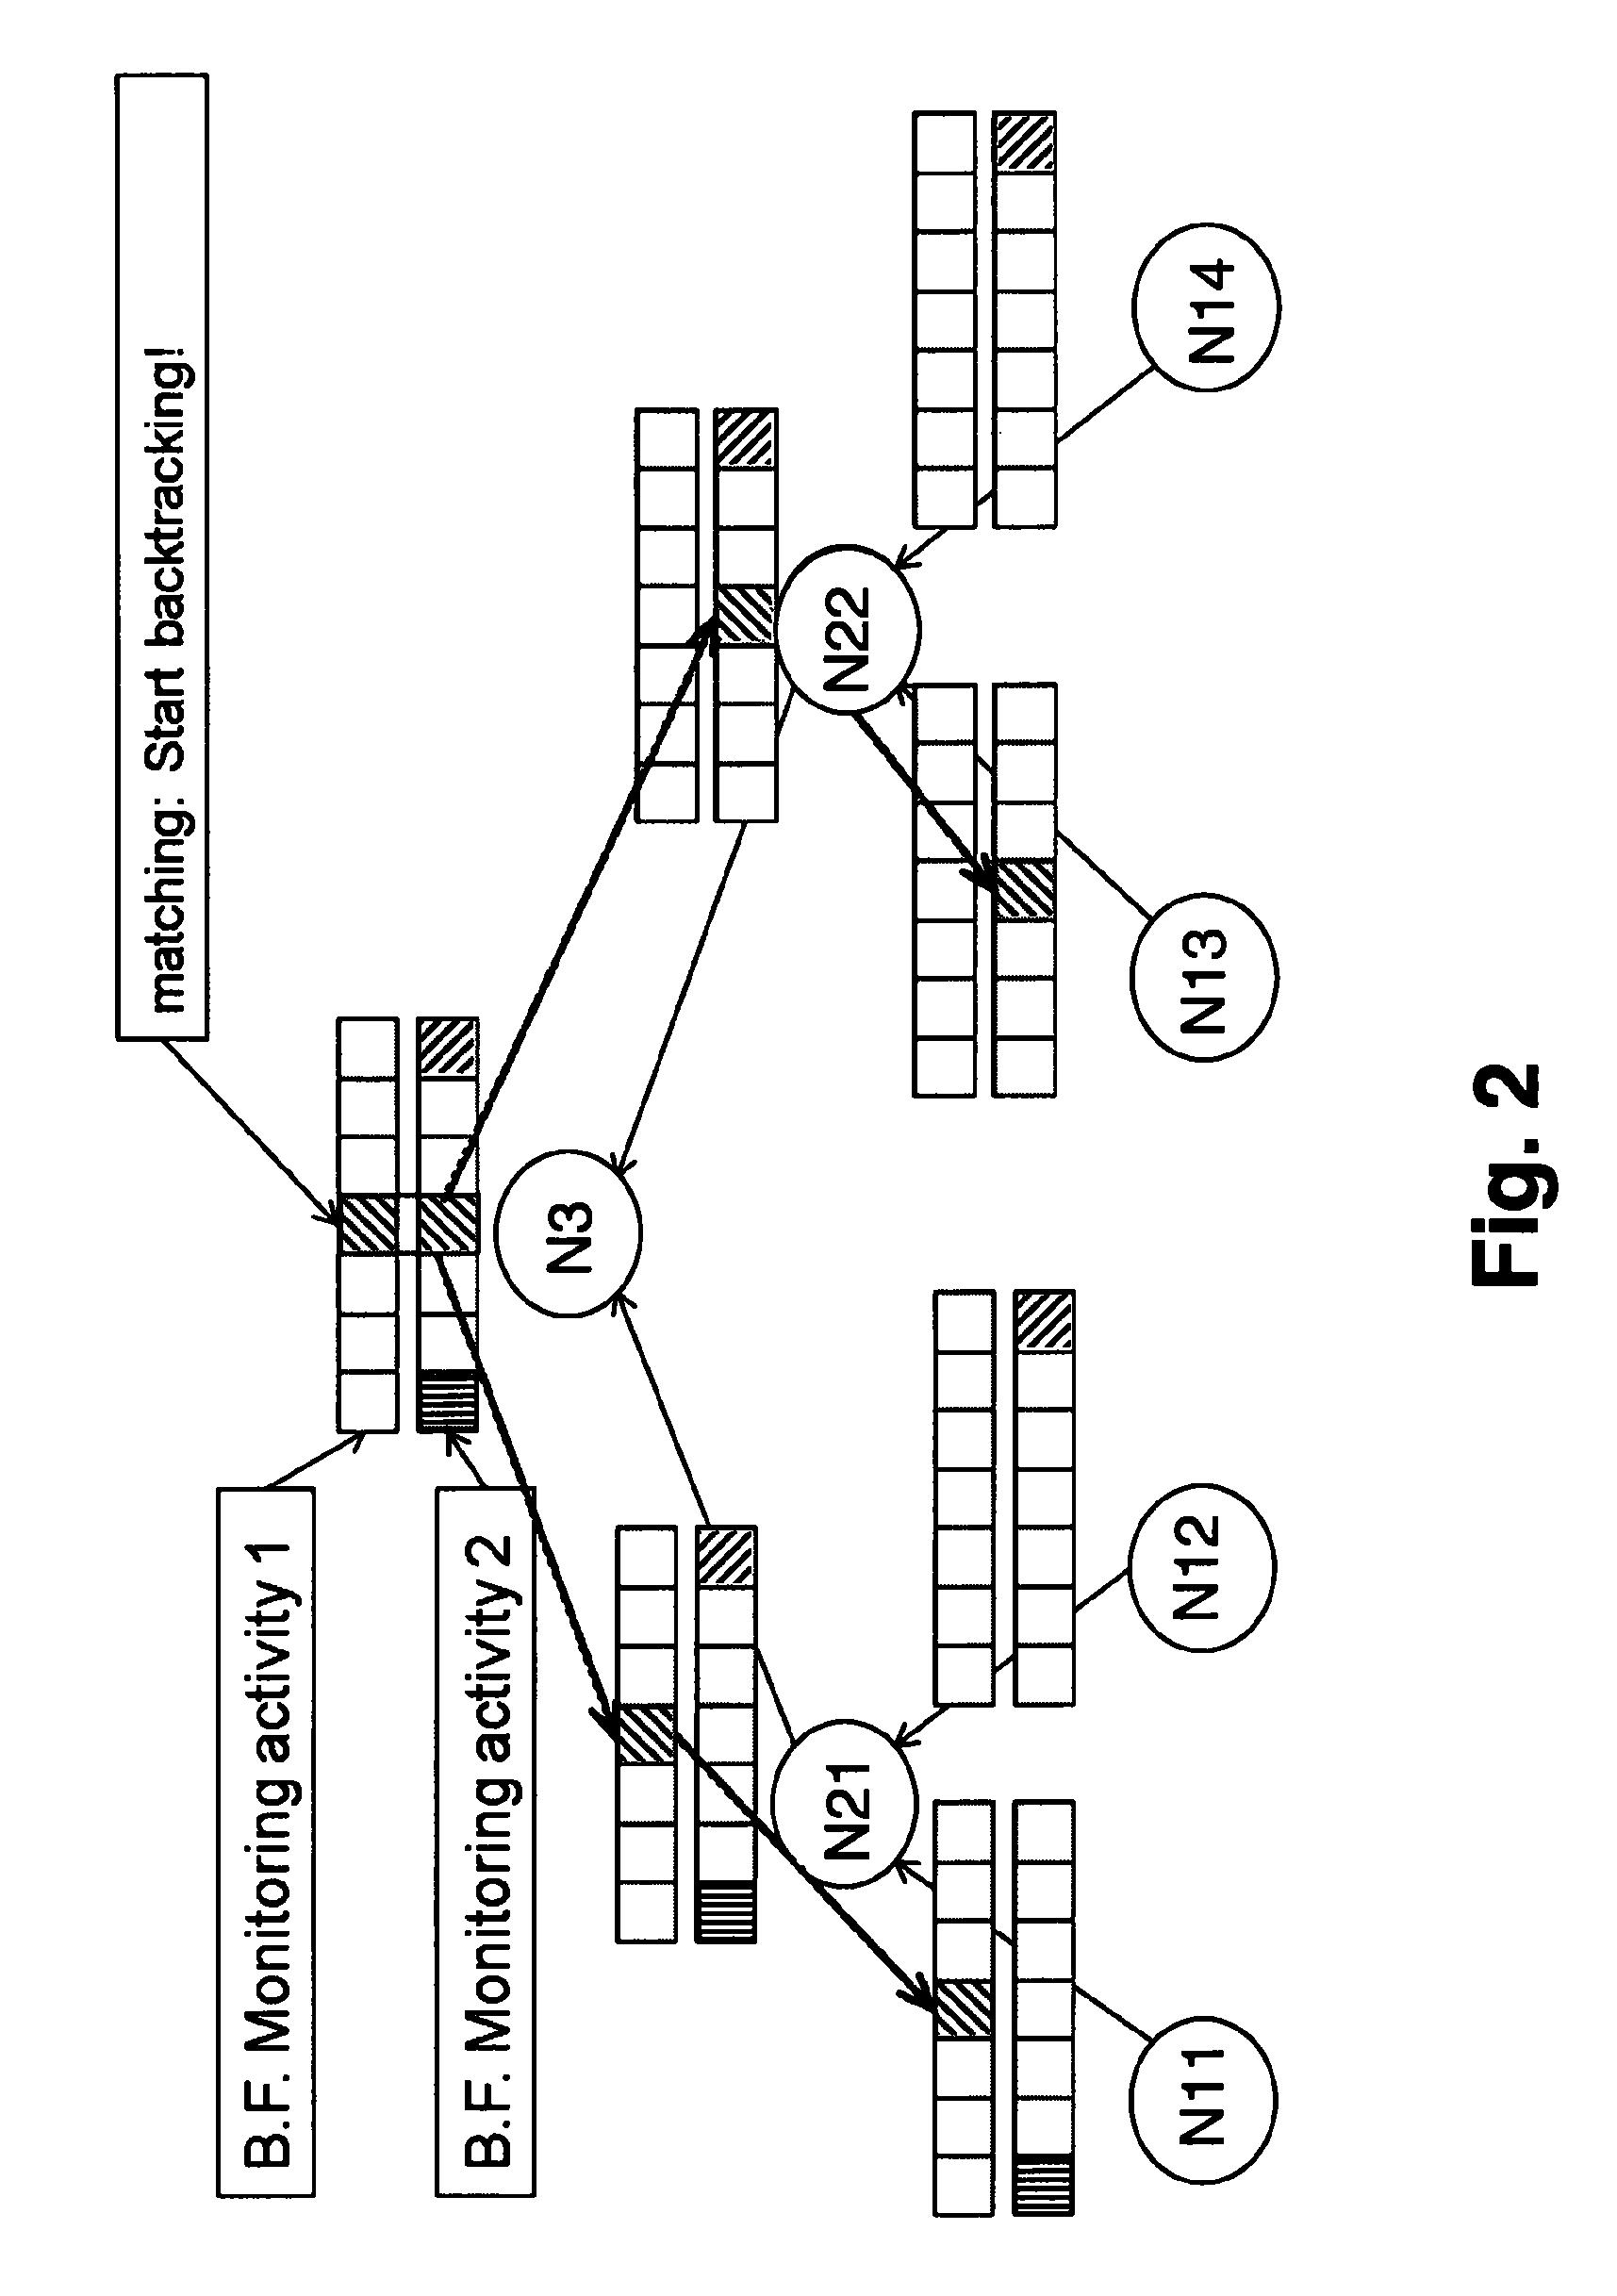 Method for monitoring a network and network including a monitoring functionality